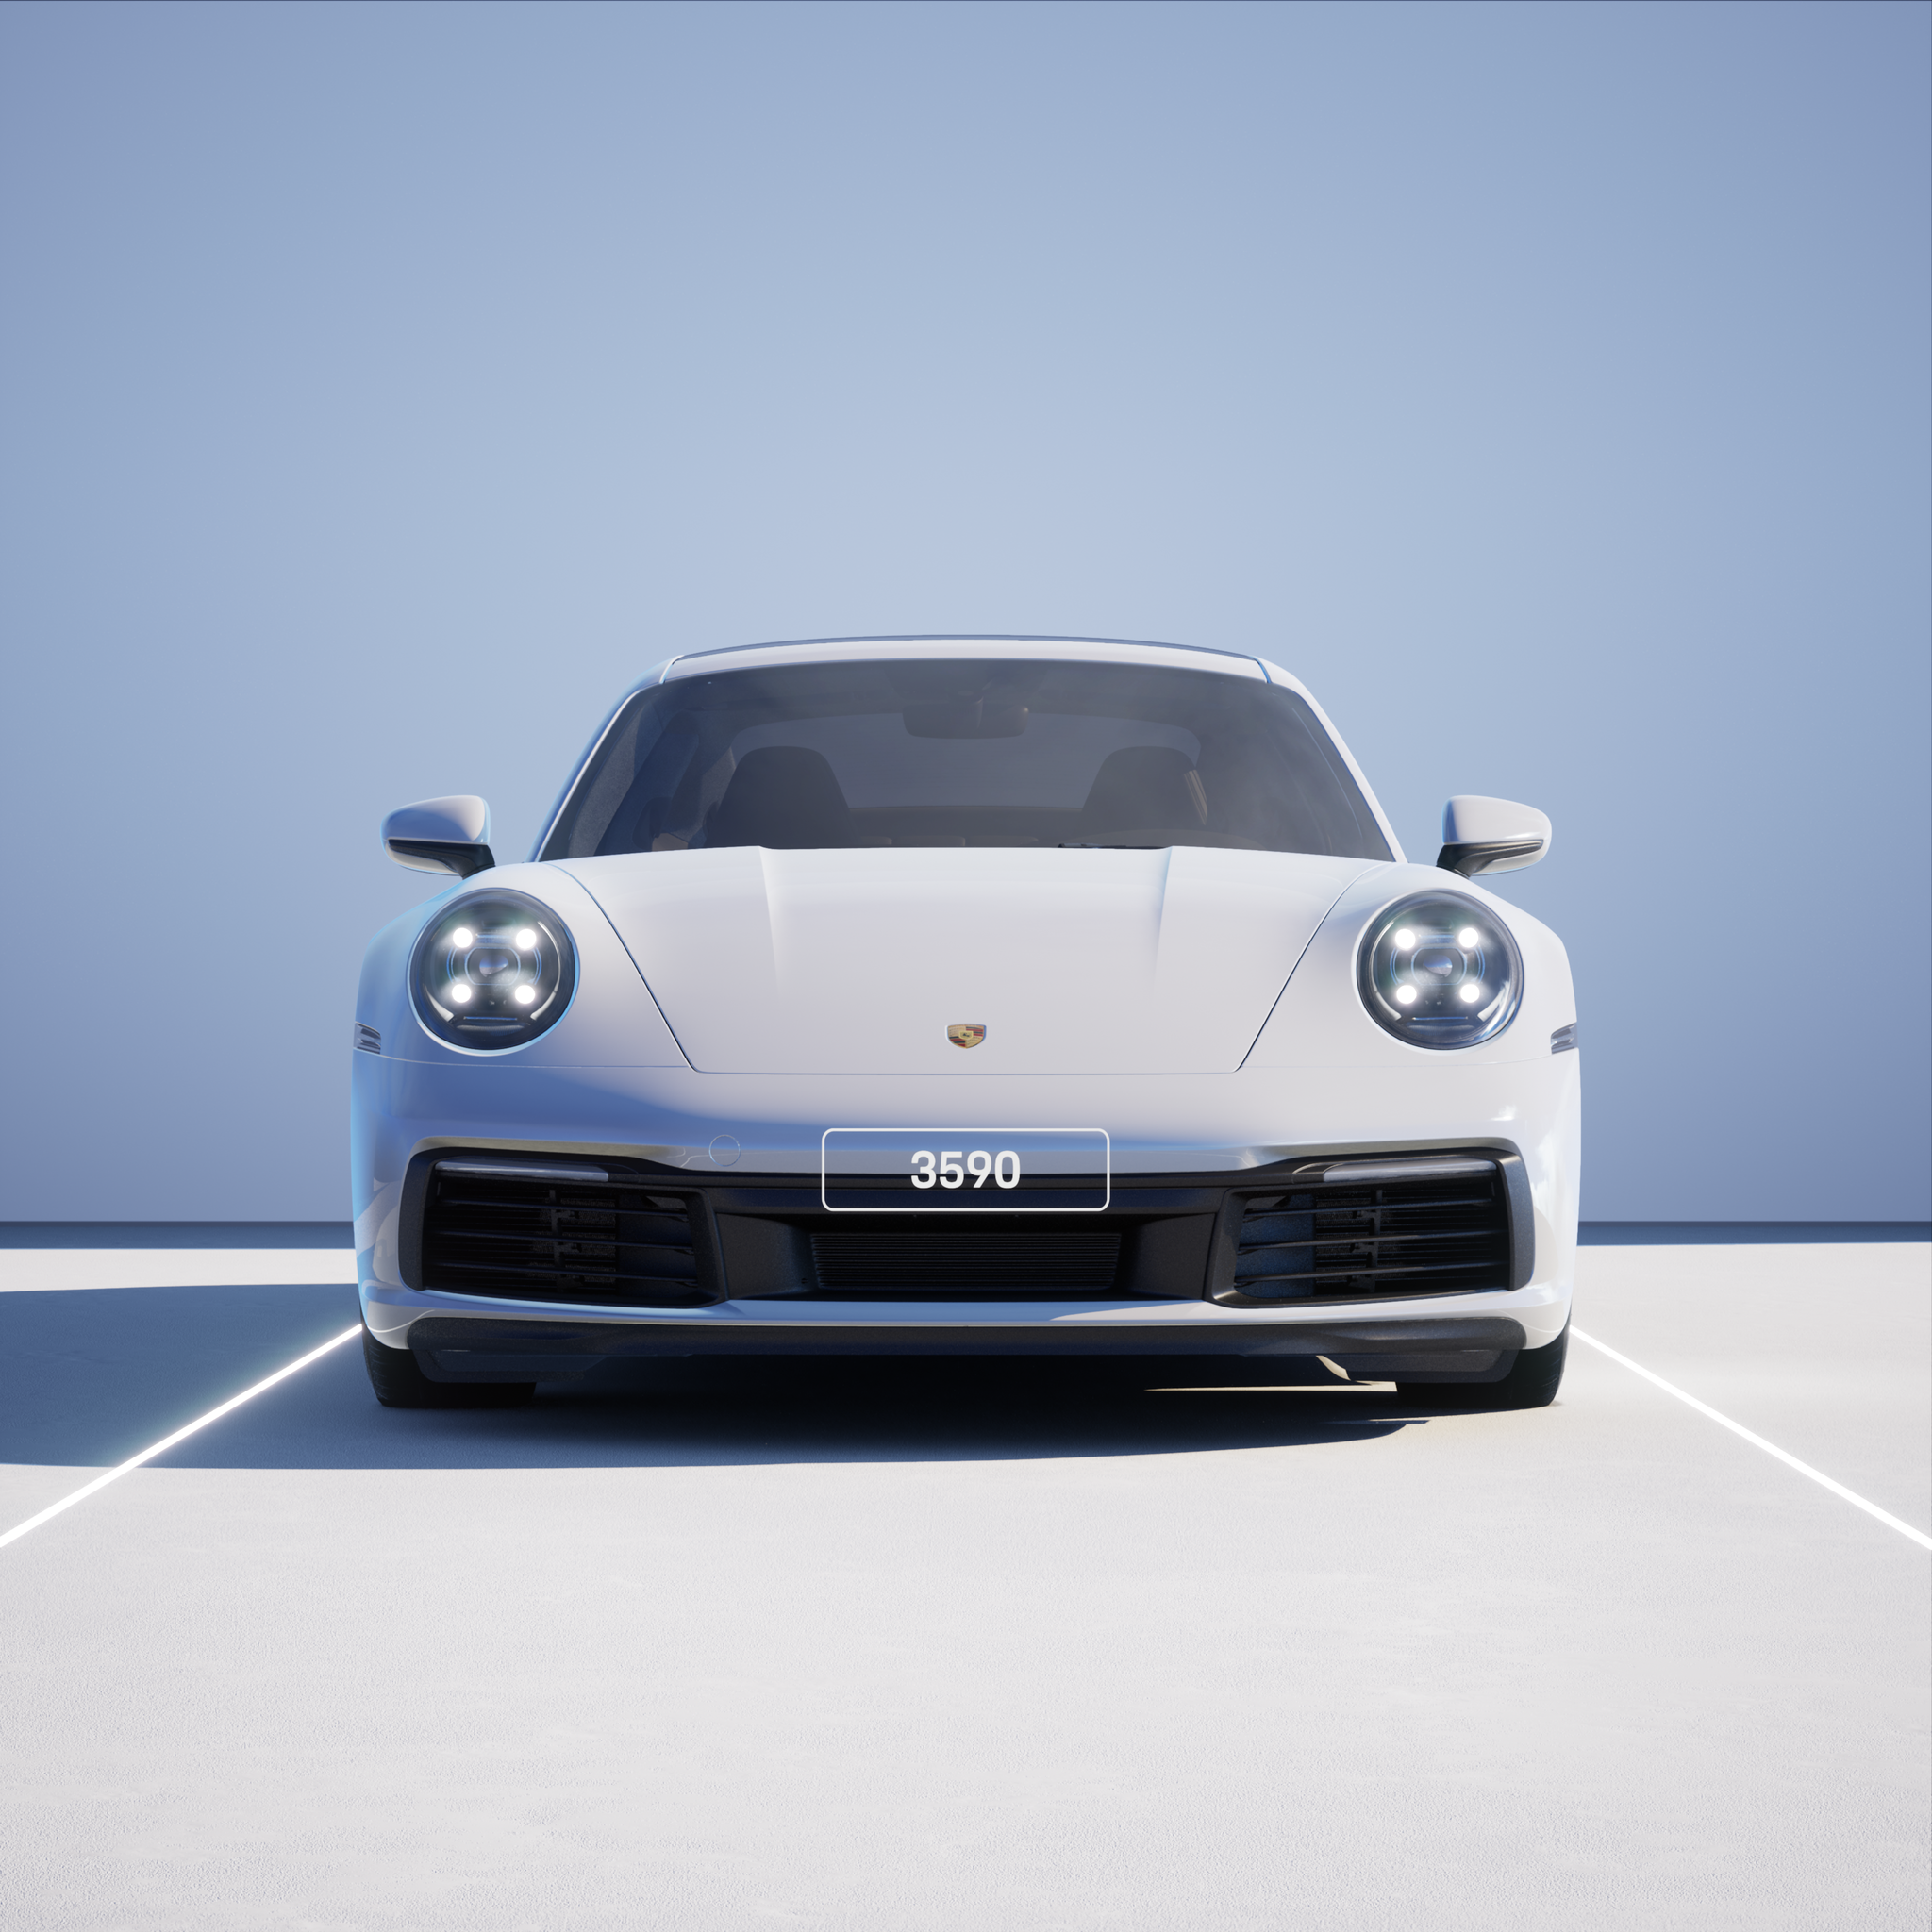 The PORSCHΞ 911 3590 image in phase